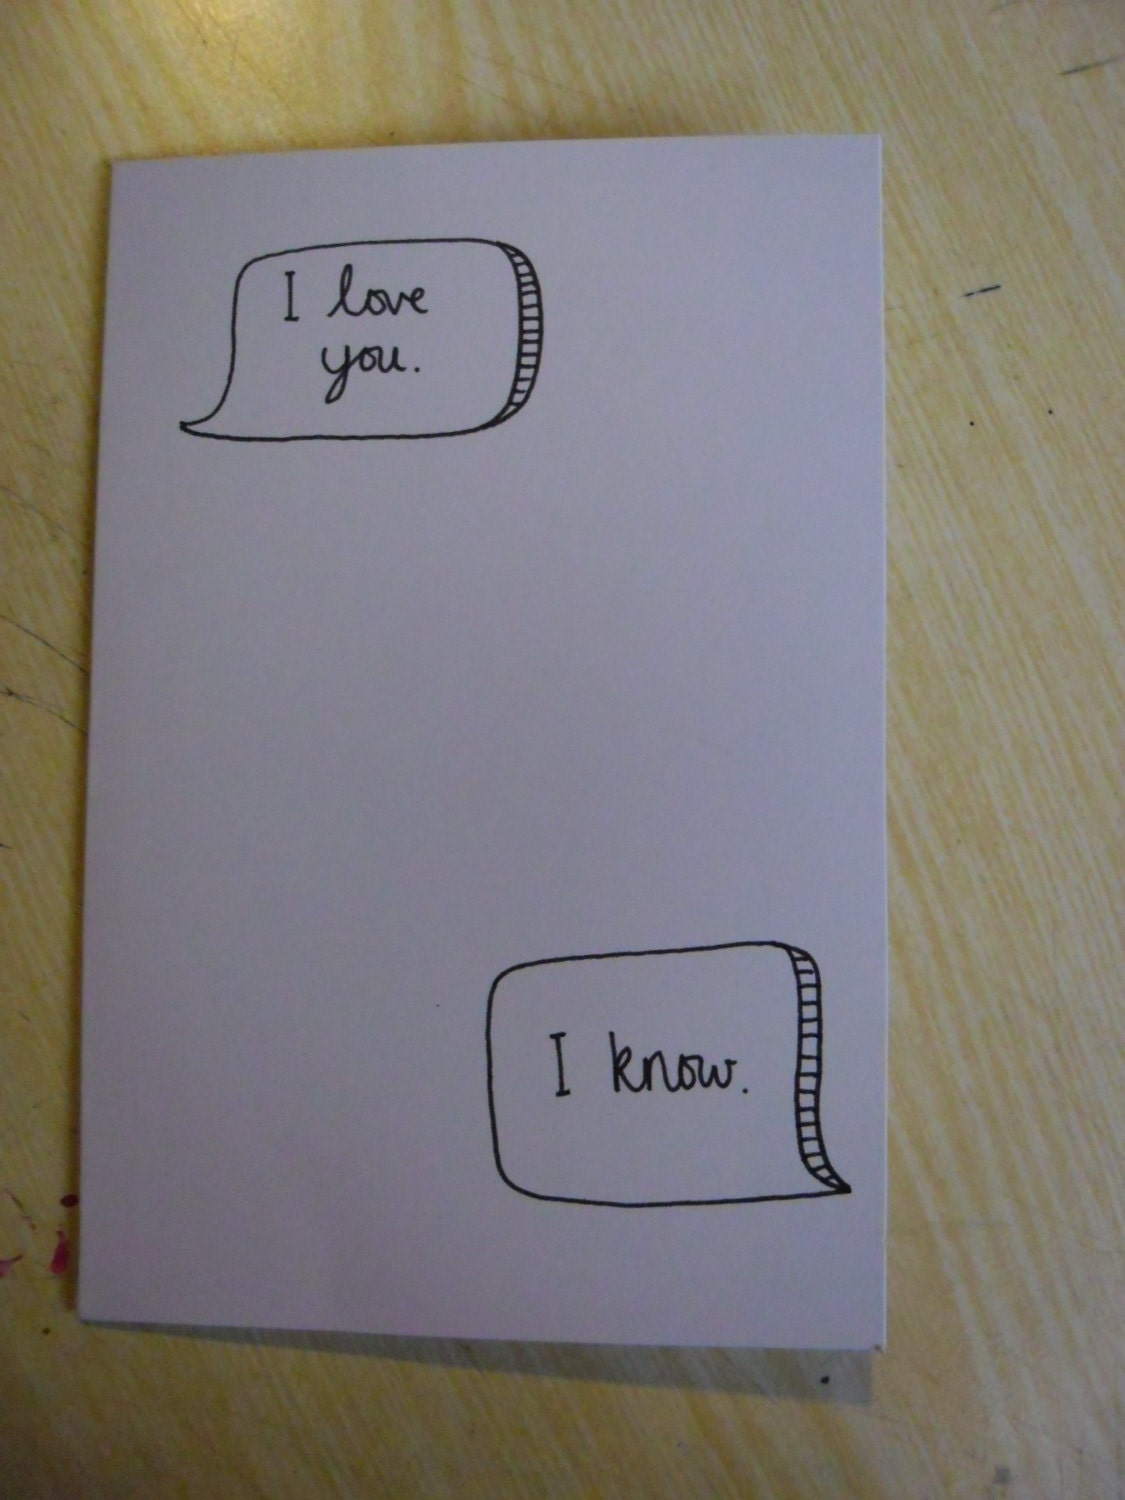 love you, i know, star wars quote love, valentines hand made ...